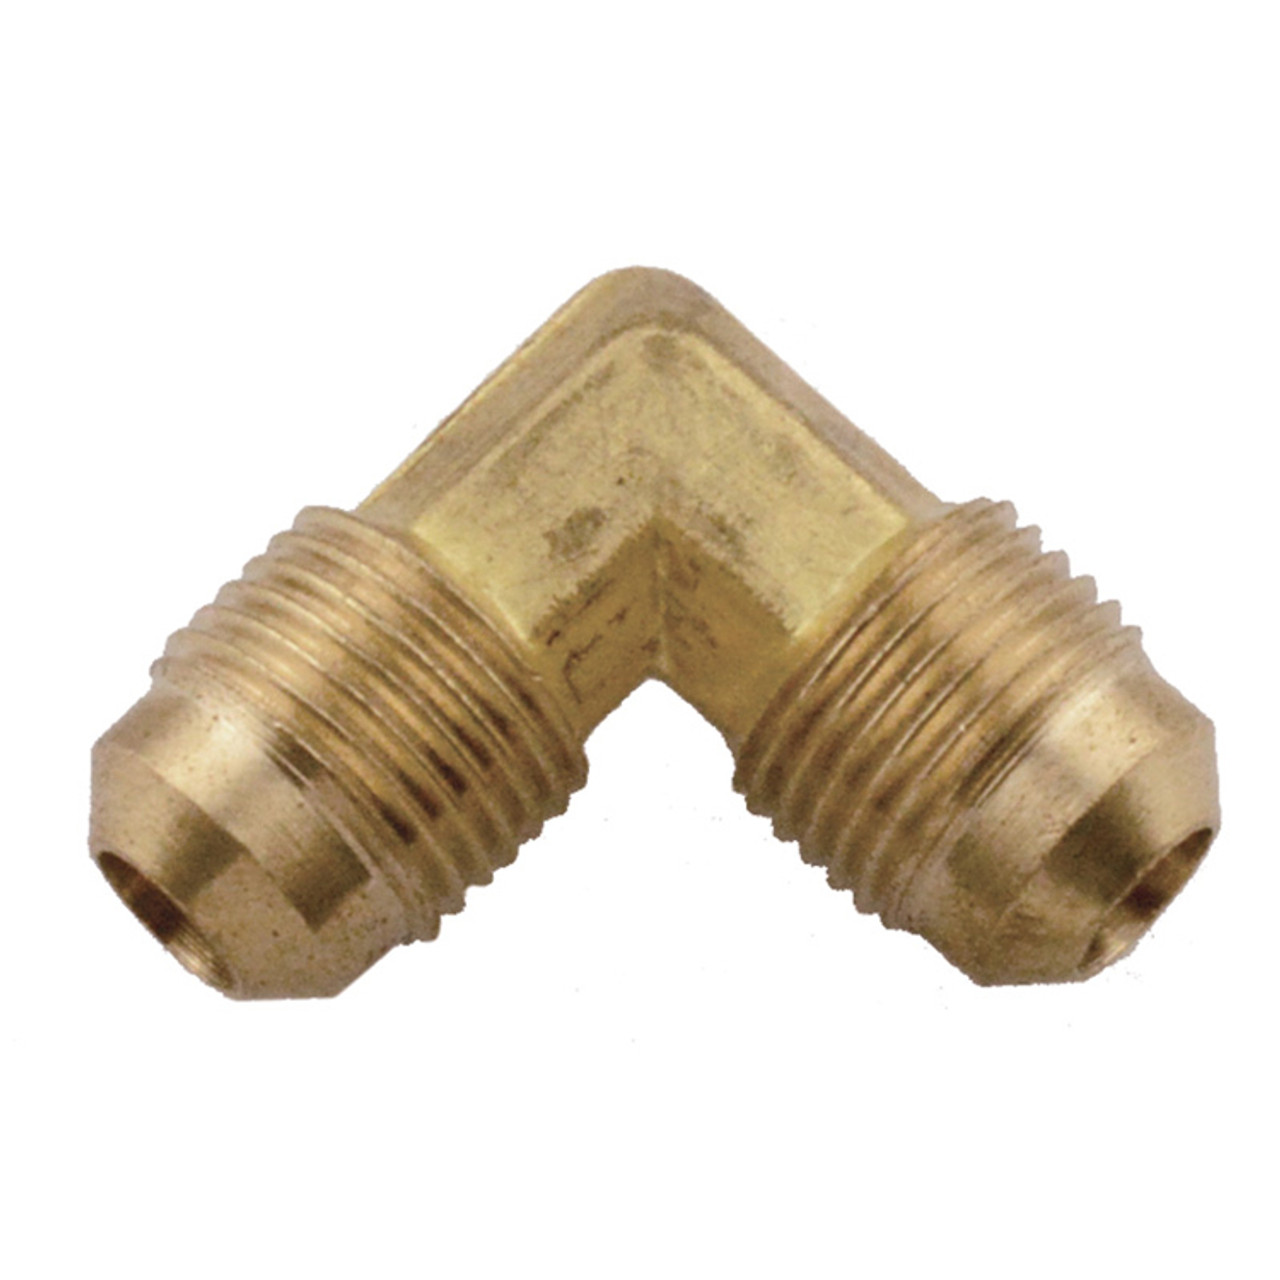 1/4 x 1/4" Brass Male 45° SAE Flare 90° Elbow   G1494-04-04